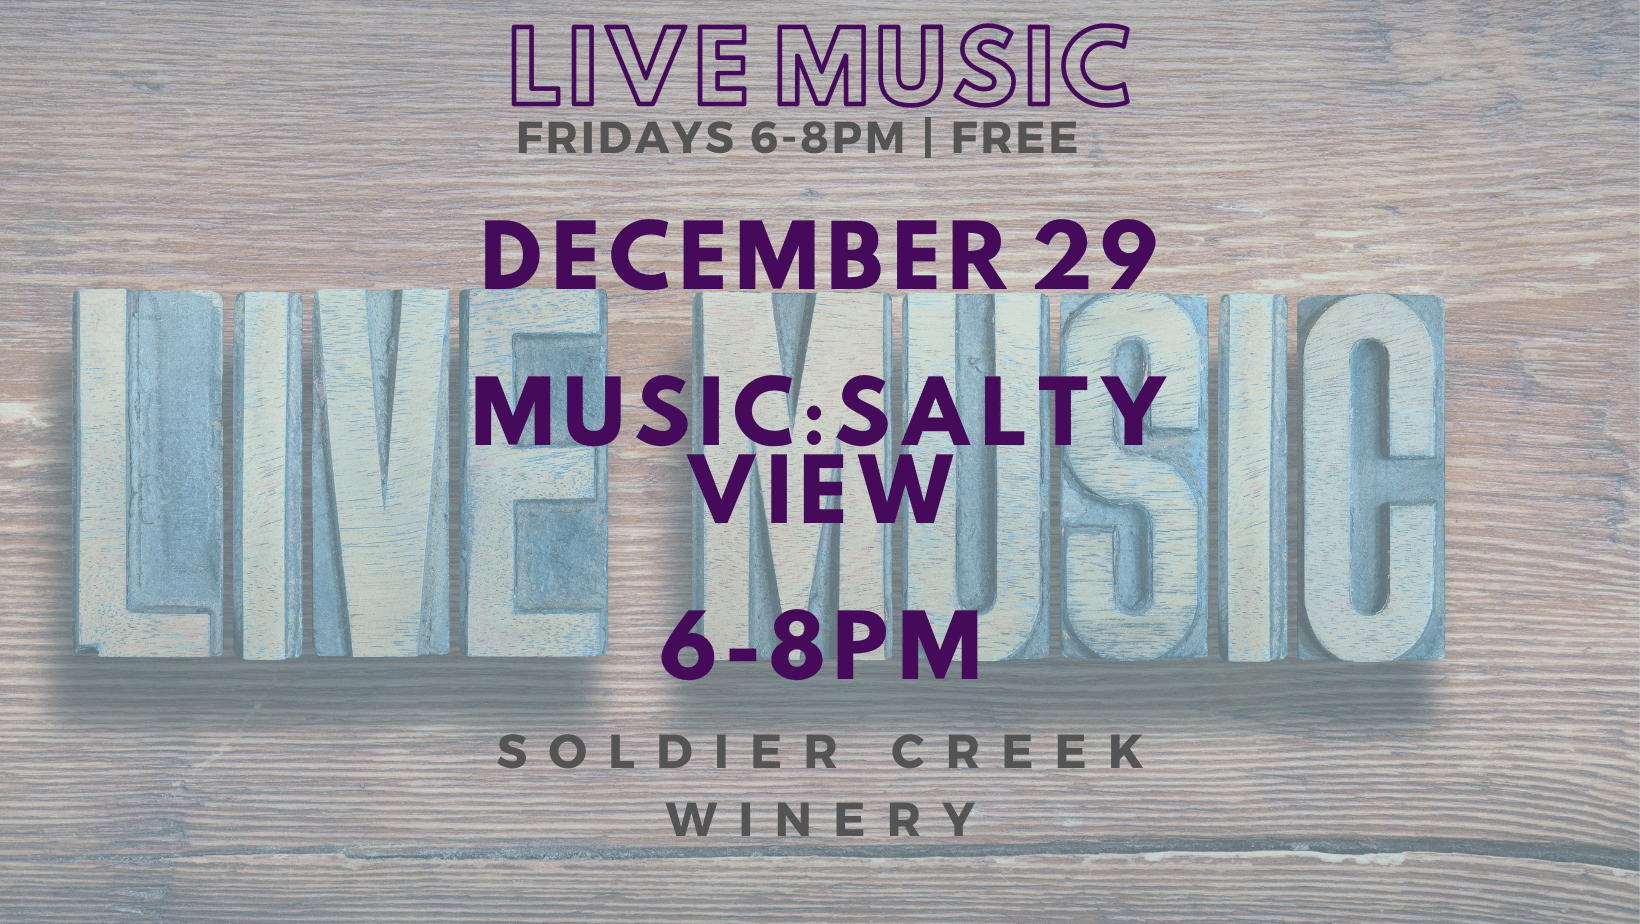 vineyard vibrations at soldier creek winery on friday, dec 29 from 6-8pm featuring salty view. free to listen!